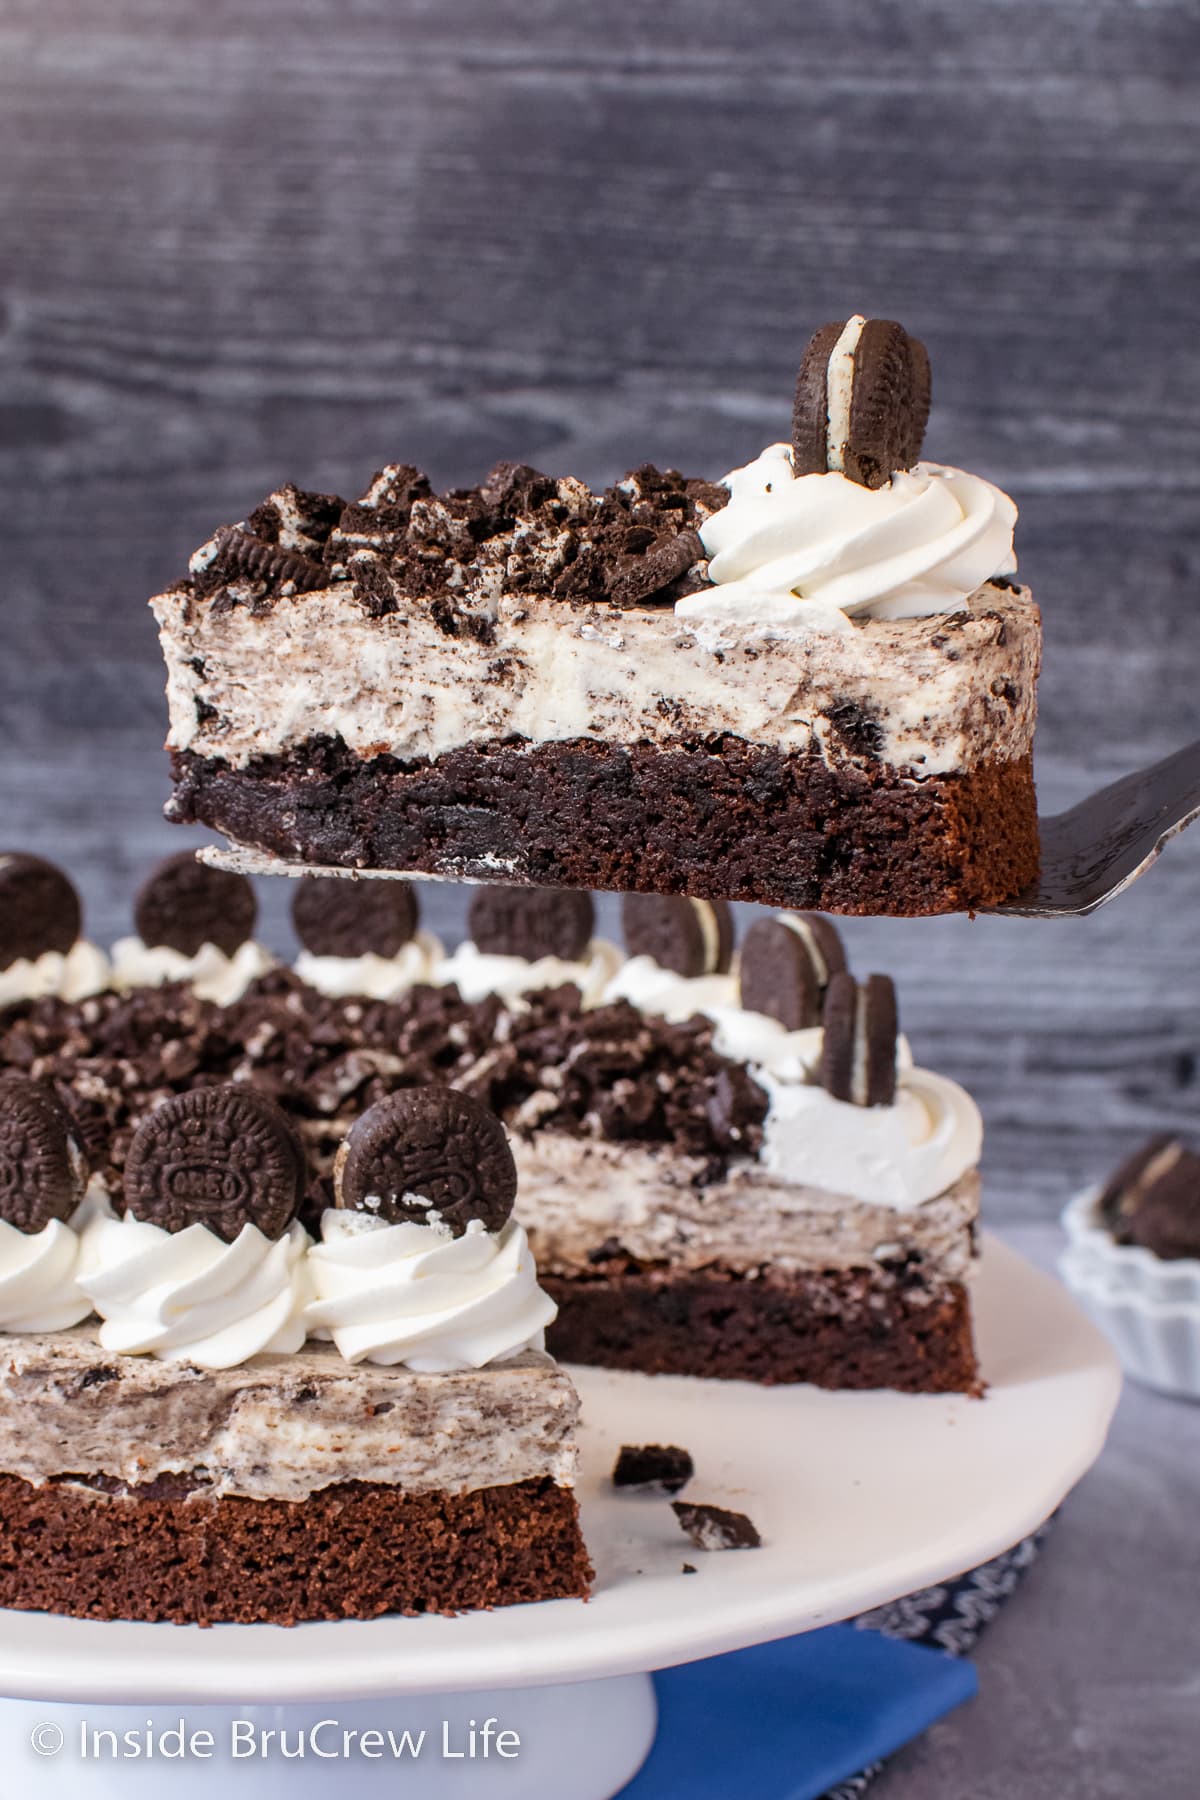 A slice of Oreo brownie cake being lifted out of a full cake.